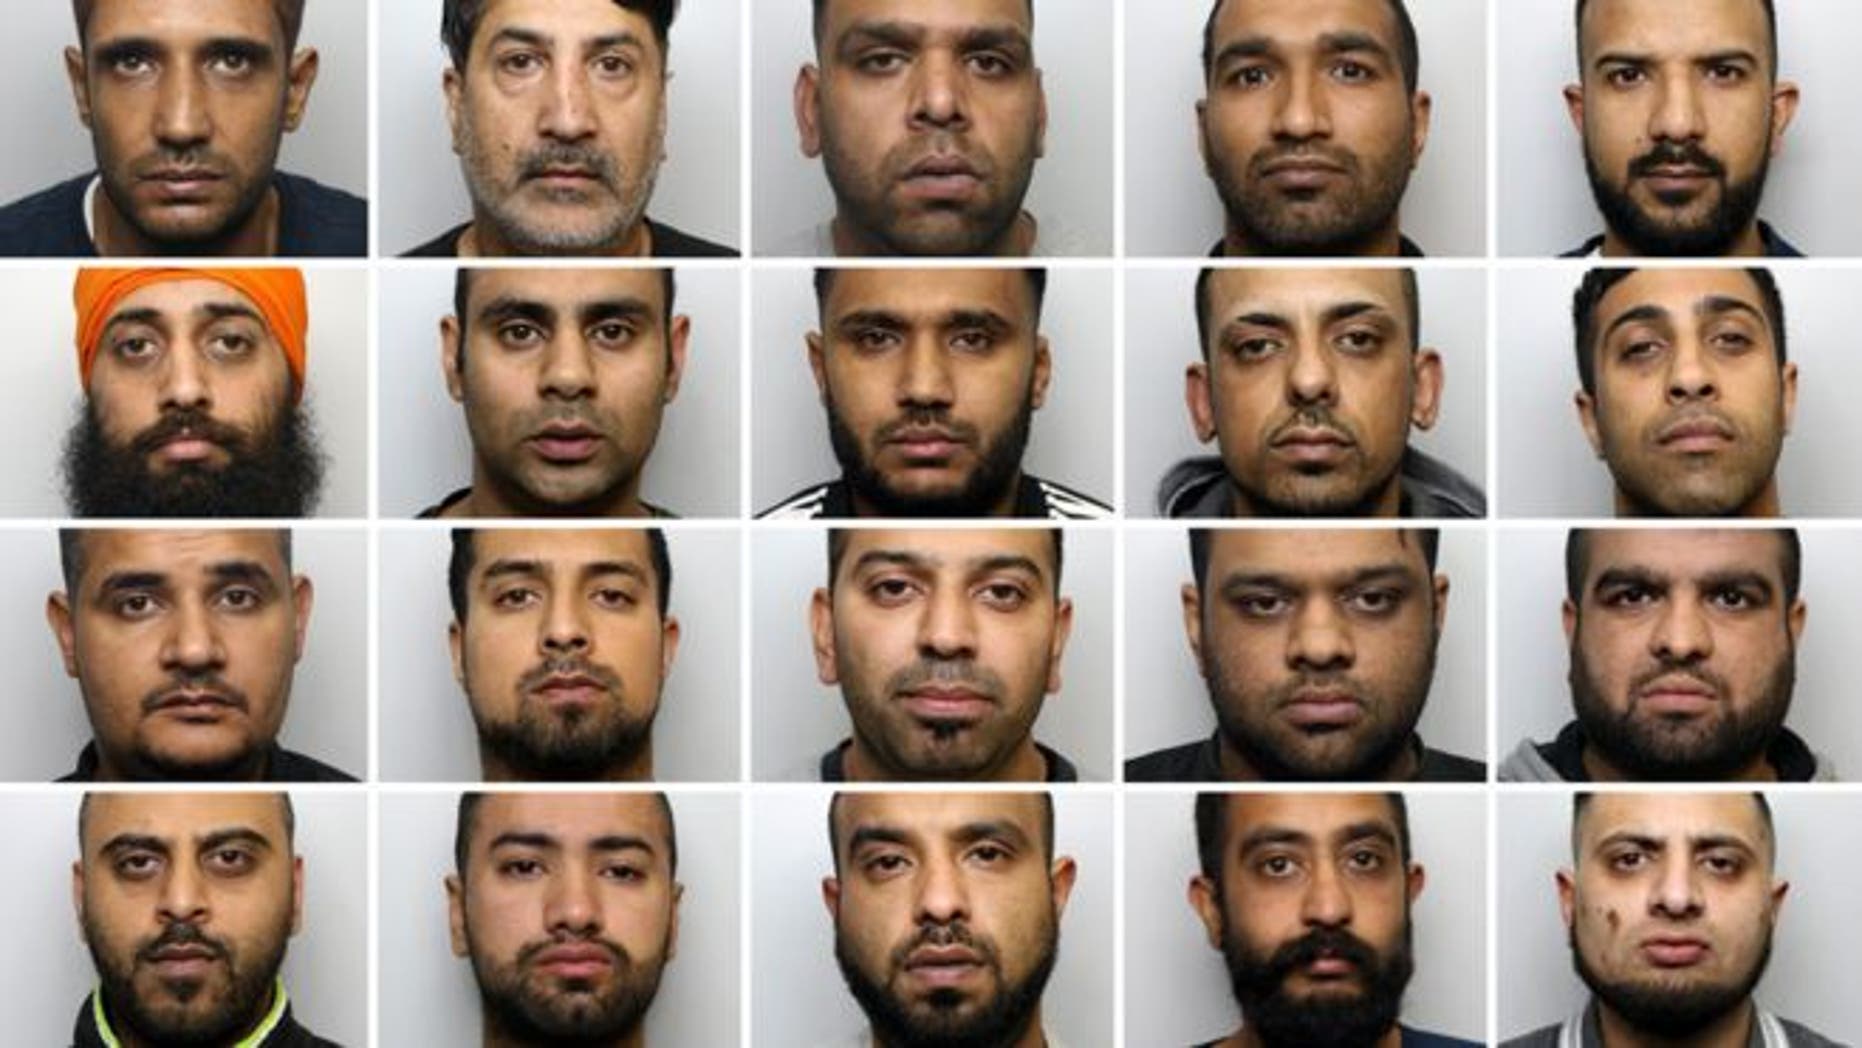 Twenty men, including ringleader Amere Singh Dhaliwal [first in theÂ second row), were found guilty of raping and abusing more than a dozen teenager girls in the U.K.